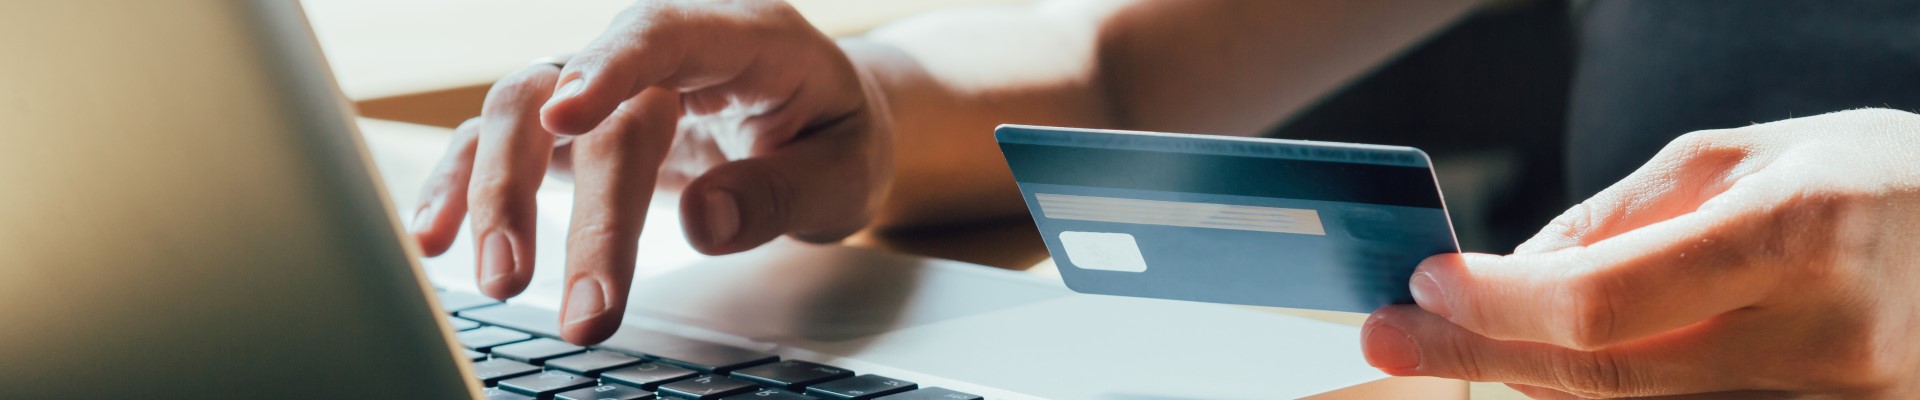 Banner online payment credit card image